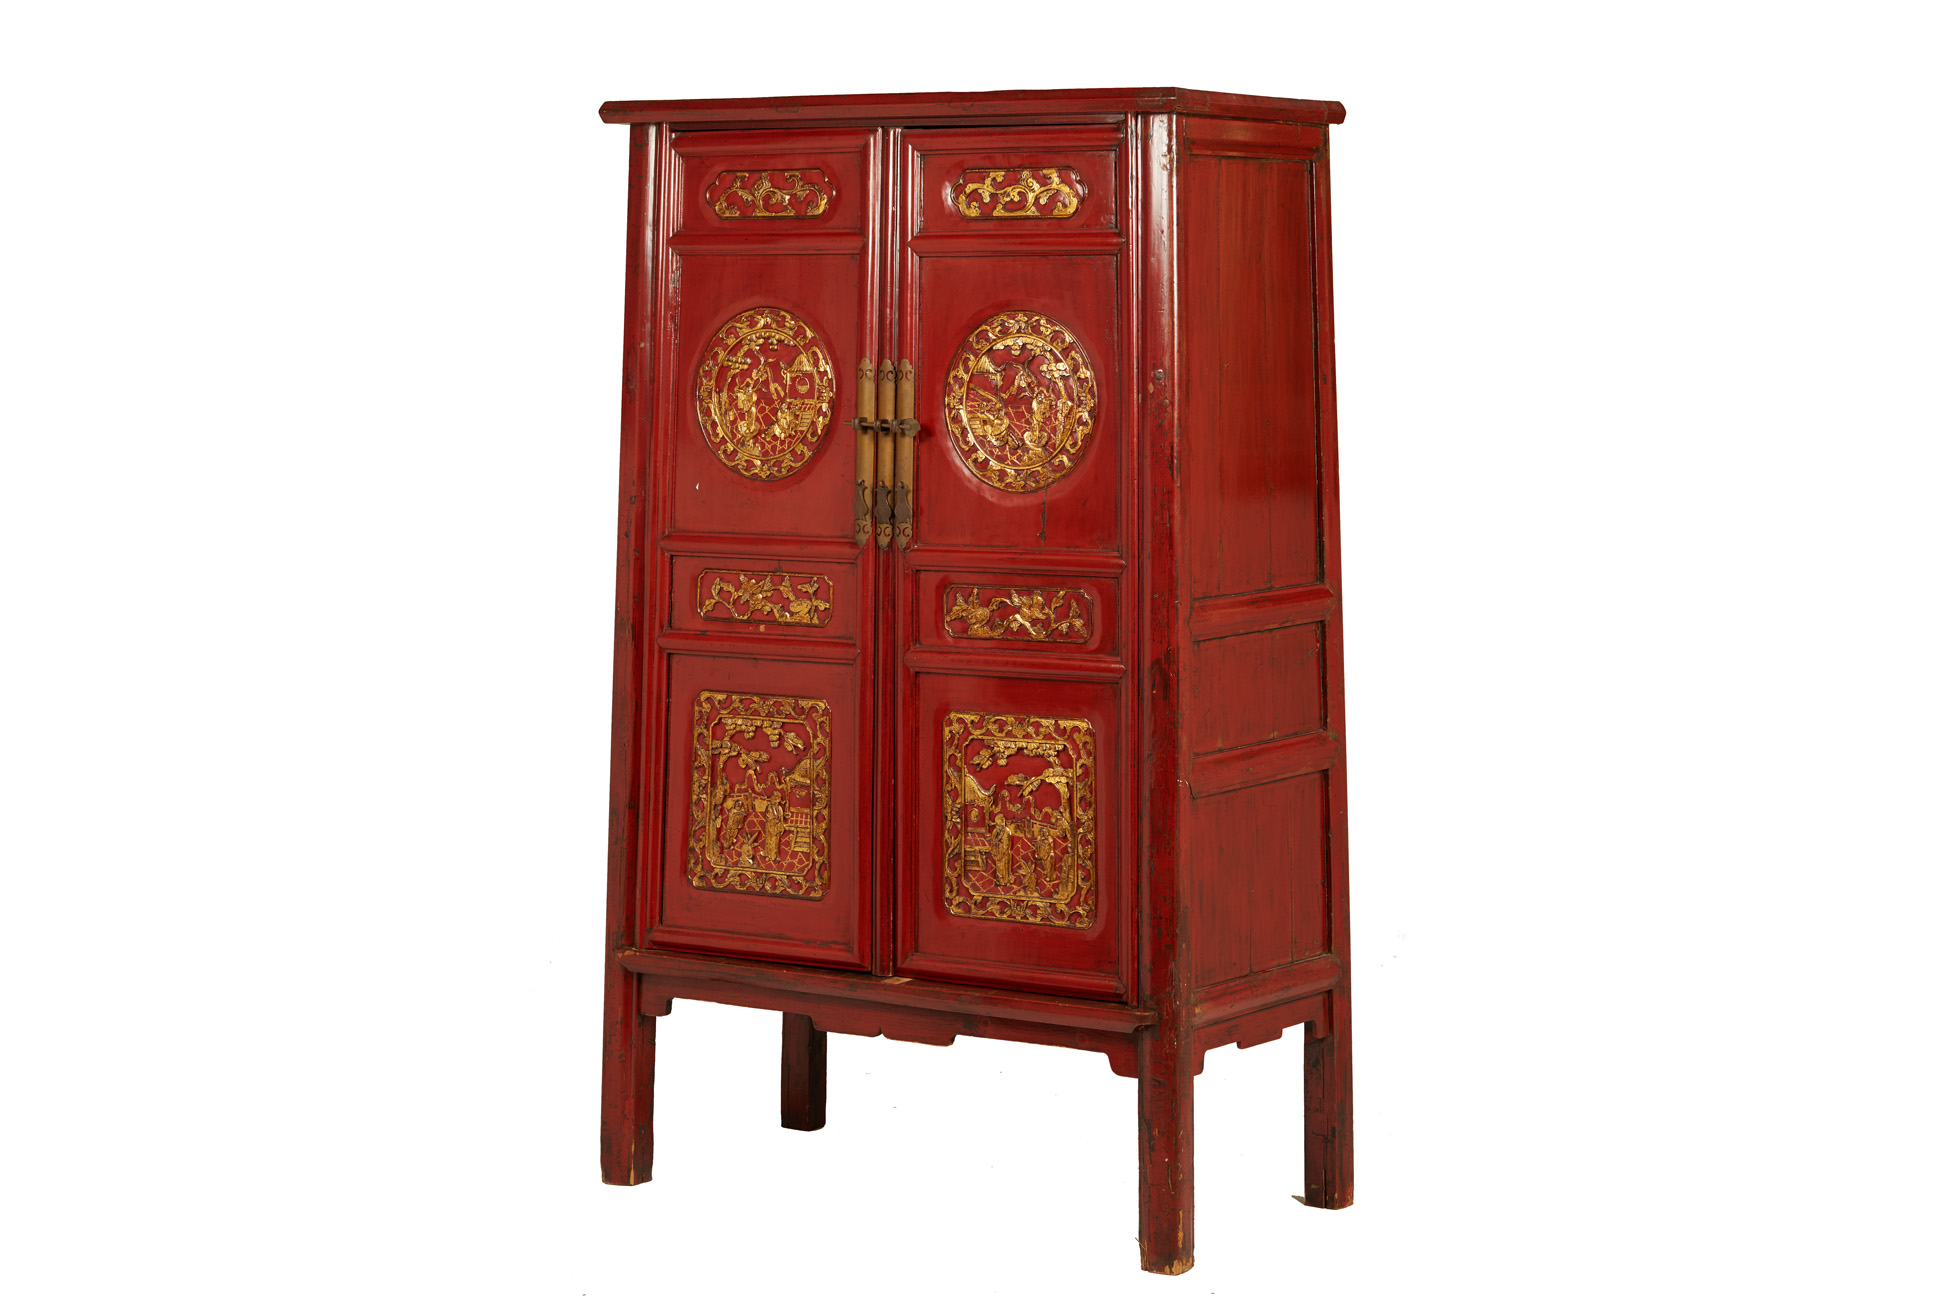 A CHINESE RED LACQUER CABINET